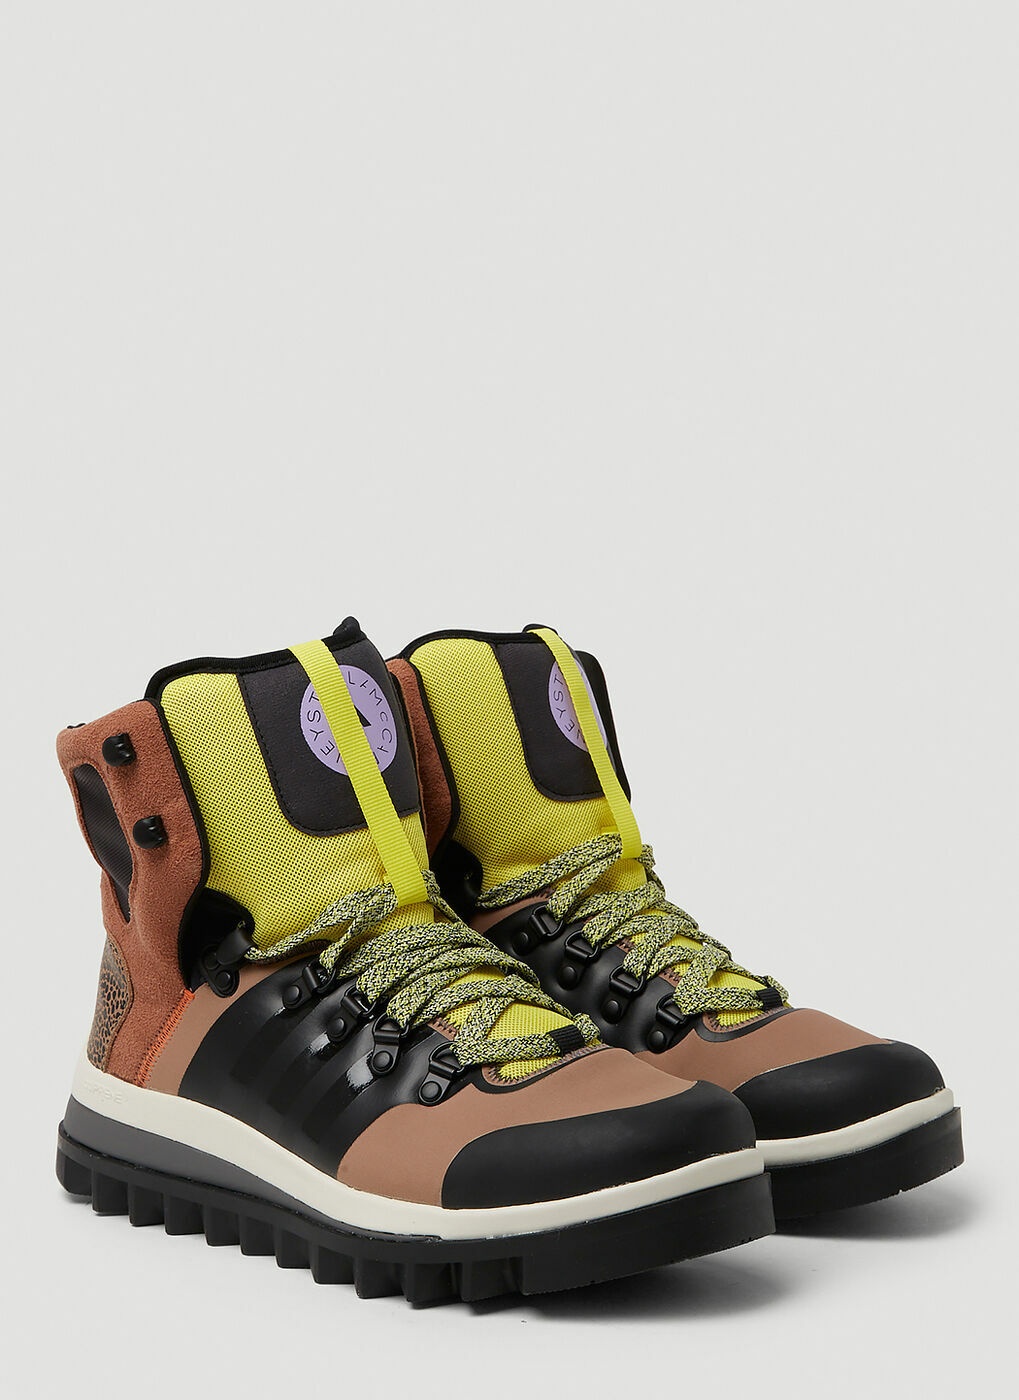 Eulampis Boots in Multicolour adidas by Stella McCartney